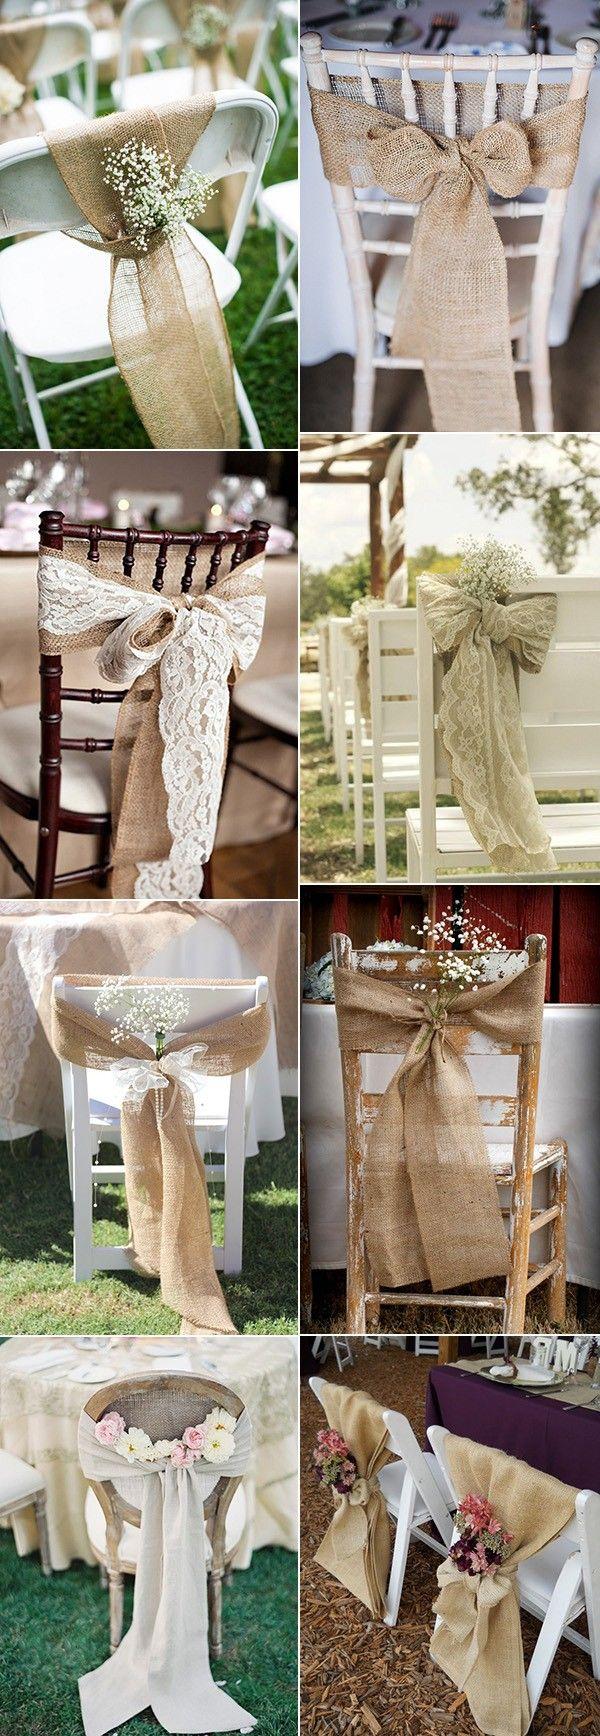 Hochzeit - 28 Awesome Wedding Chair Decoration Ideas For Ceremony And Reception